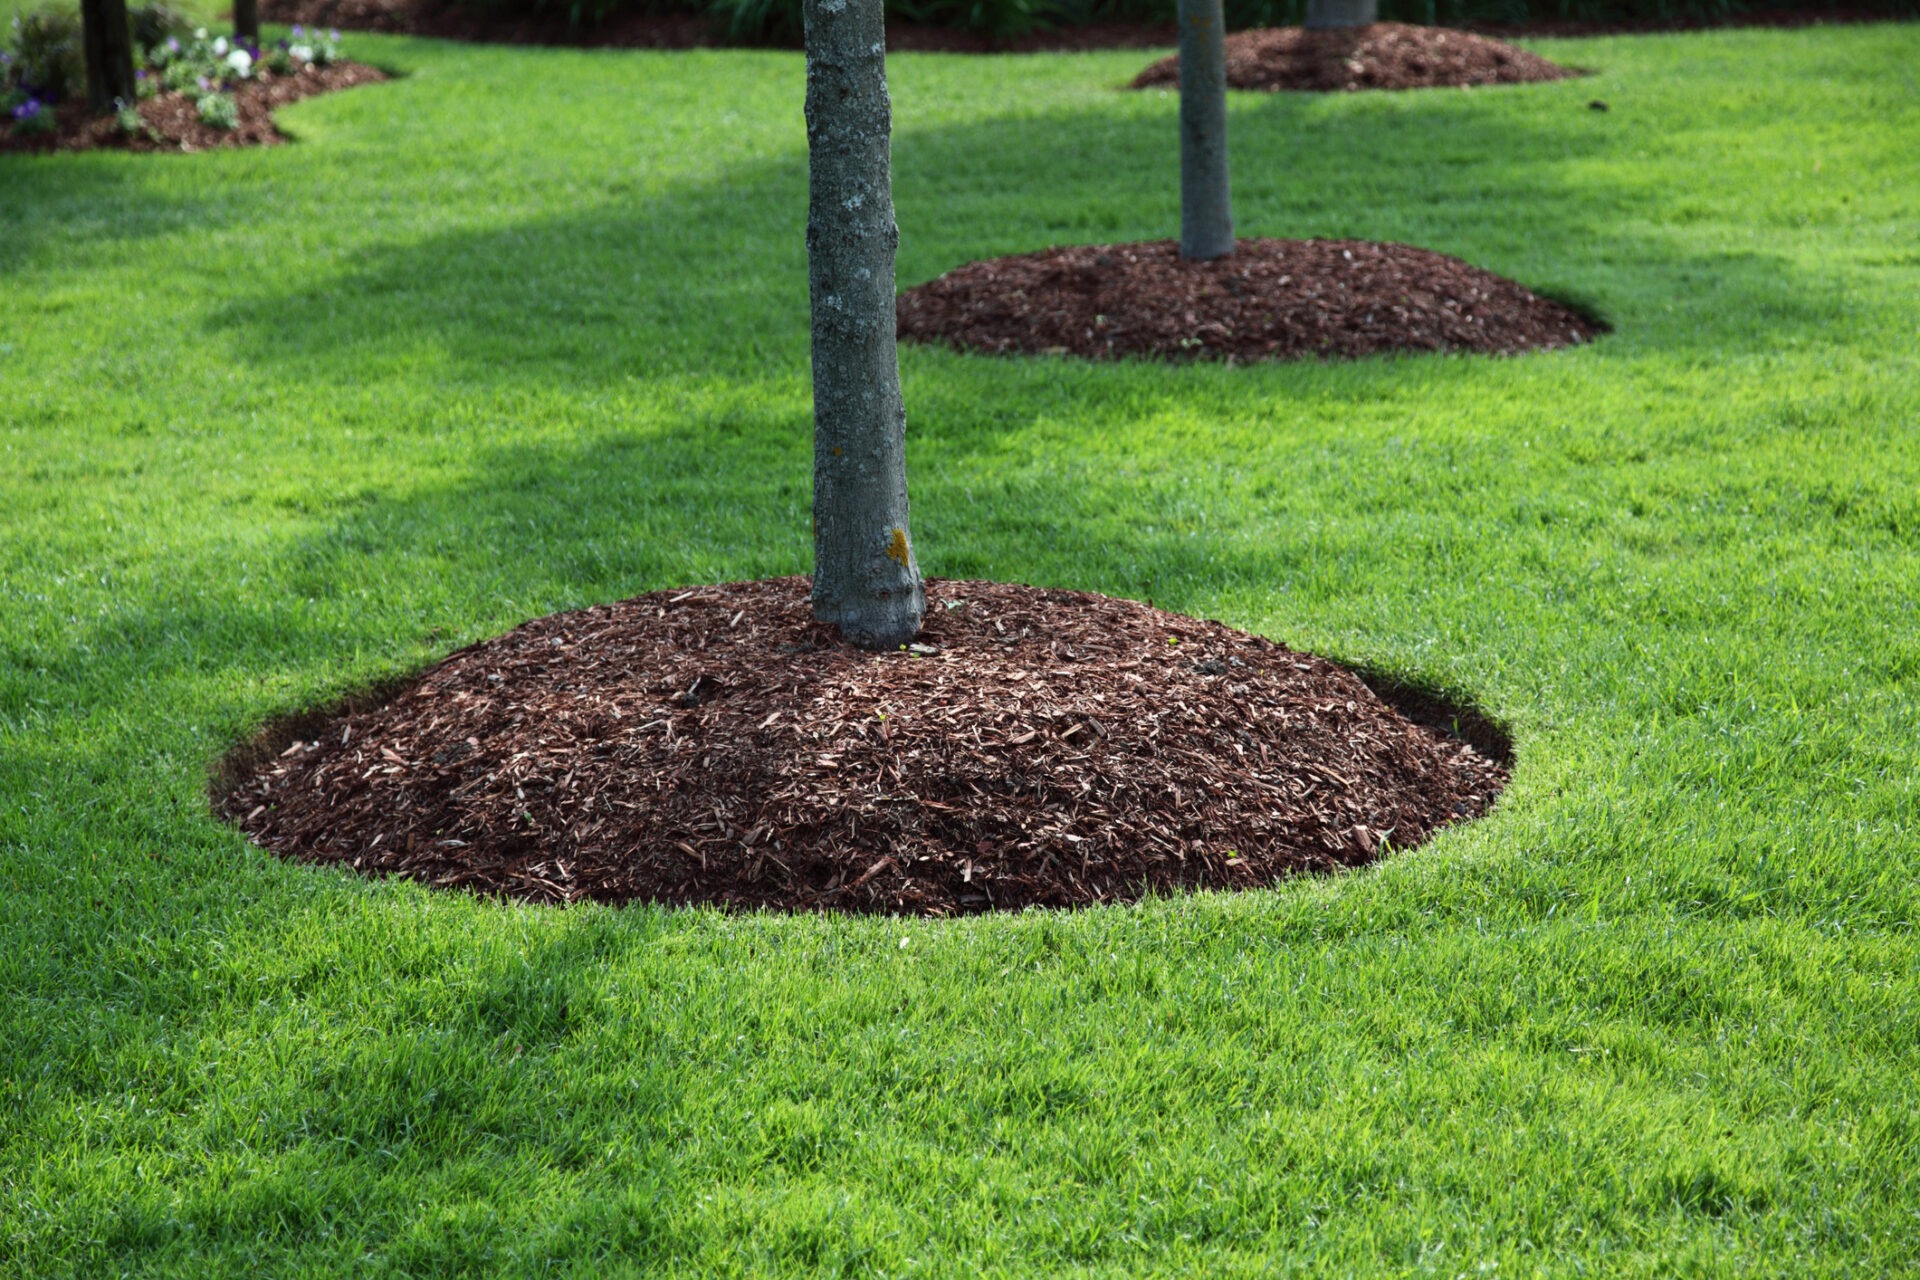 The image shows a neatly manicured lawn with a tree trunk surrounded by a circular mulch bed in a well-maintained garden or park.